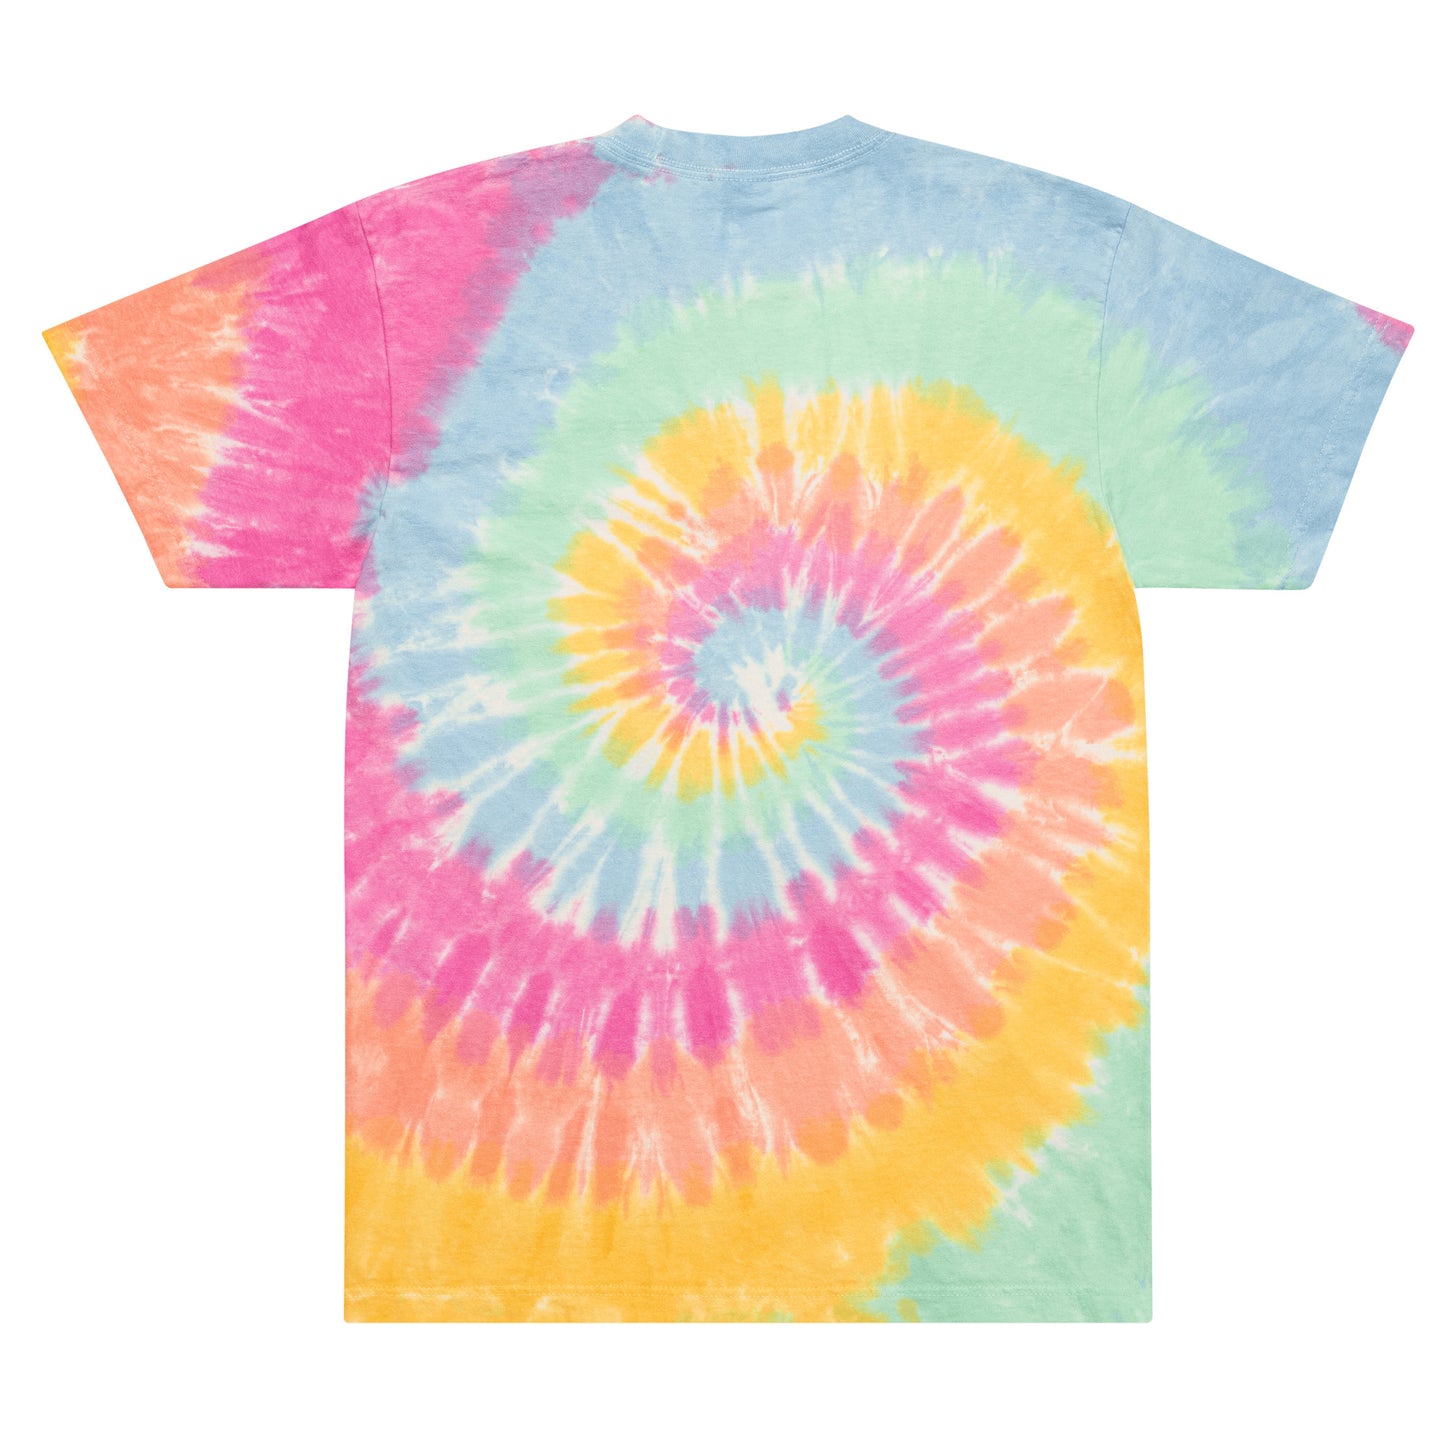 High Maintenance Embroidered  Oversized tie-dye t-shirt